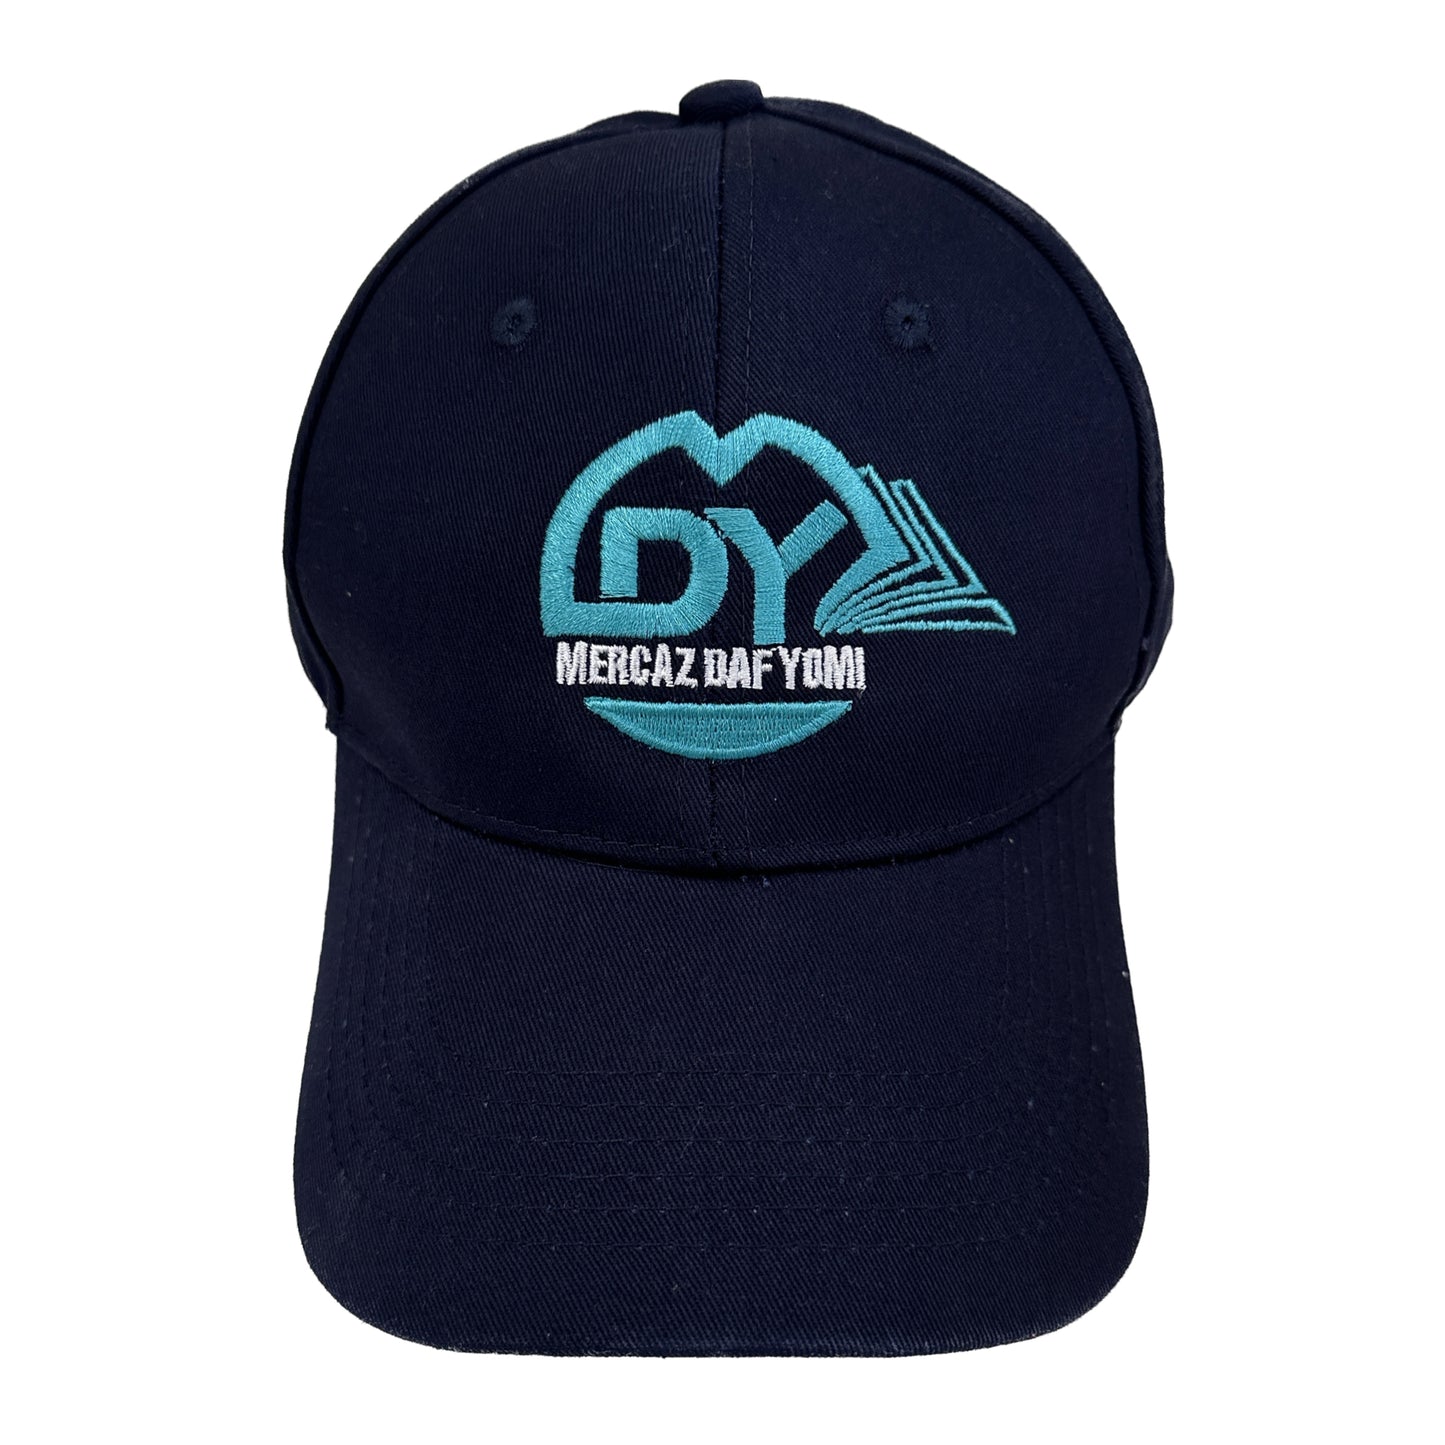 Mdy embroidered cap